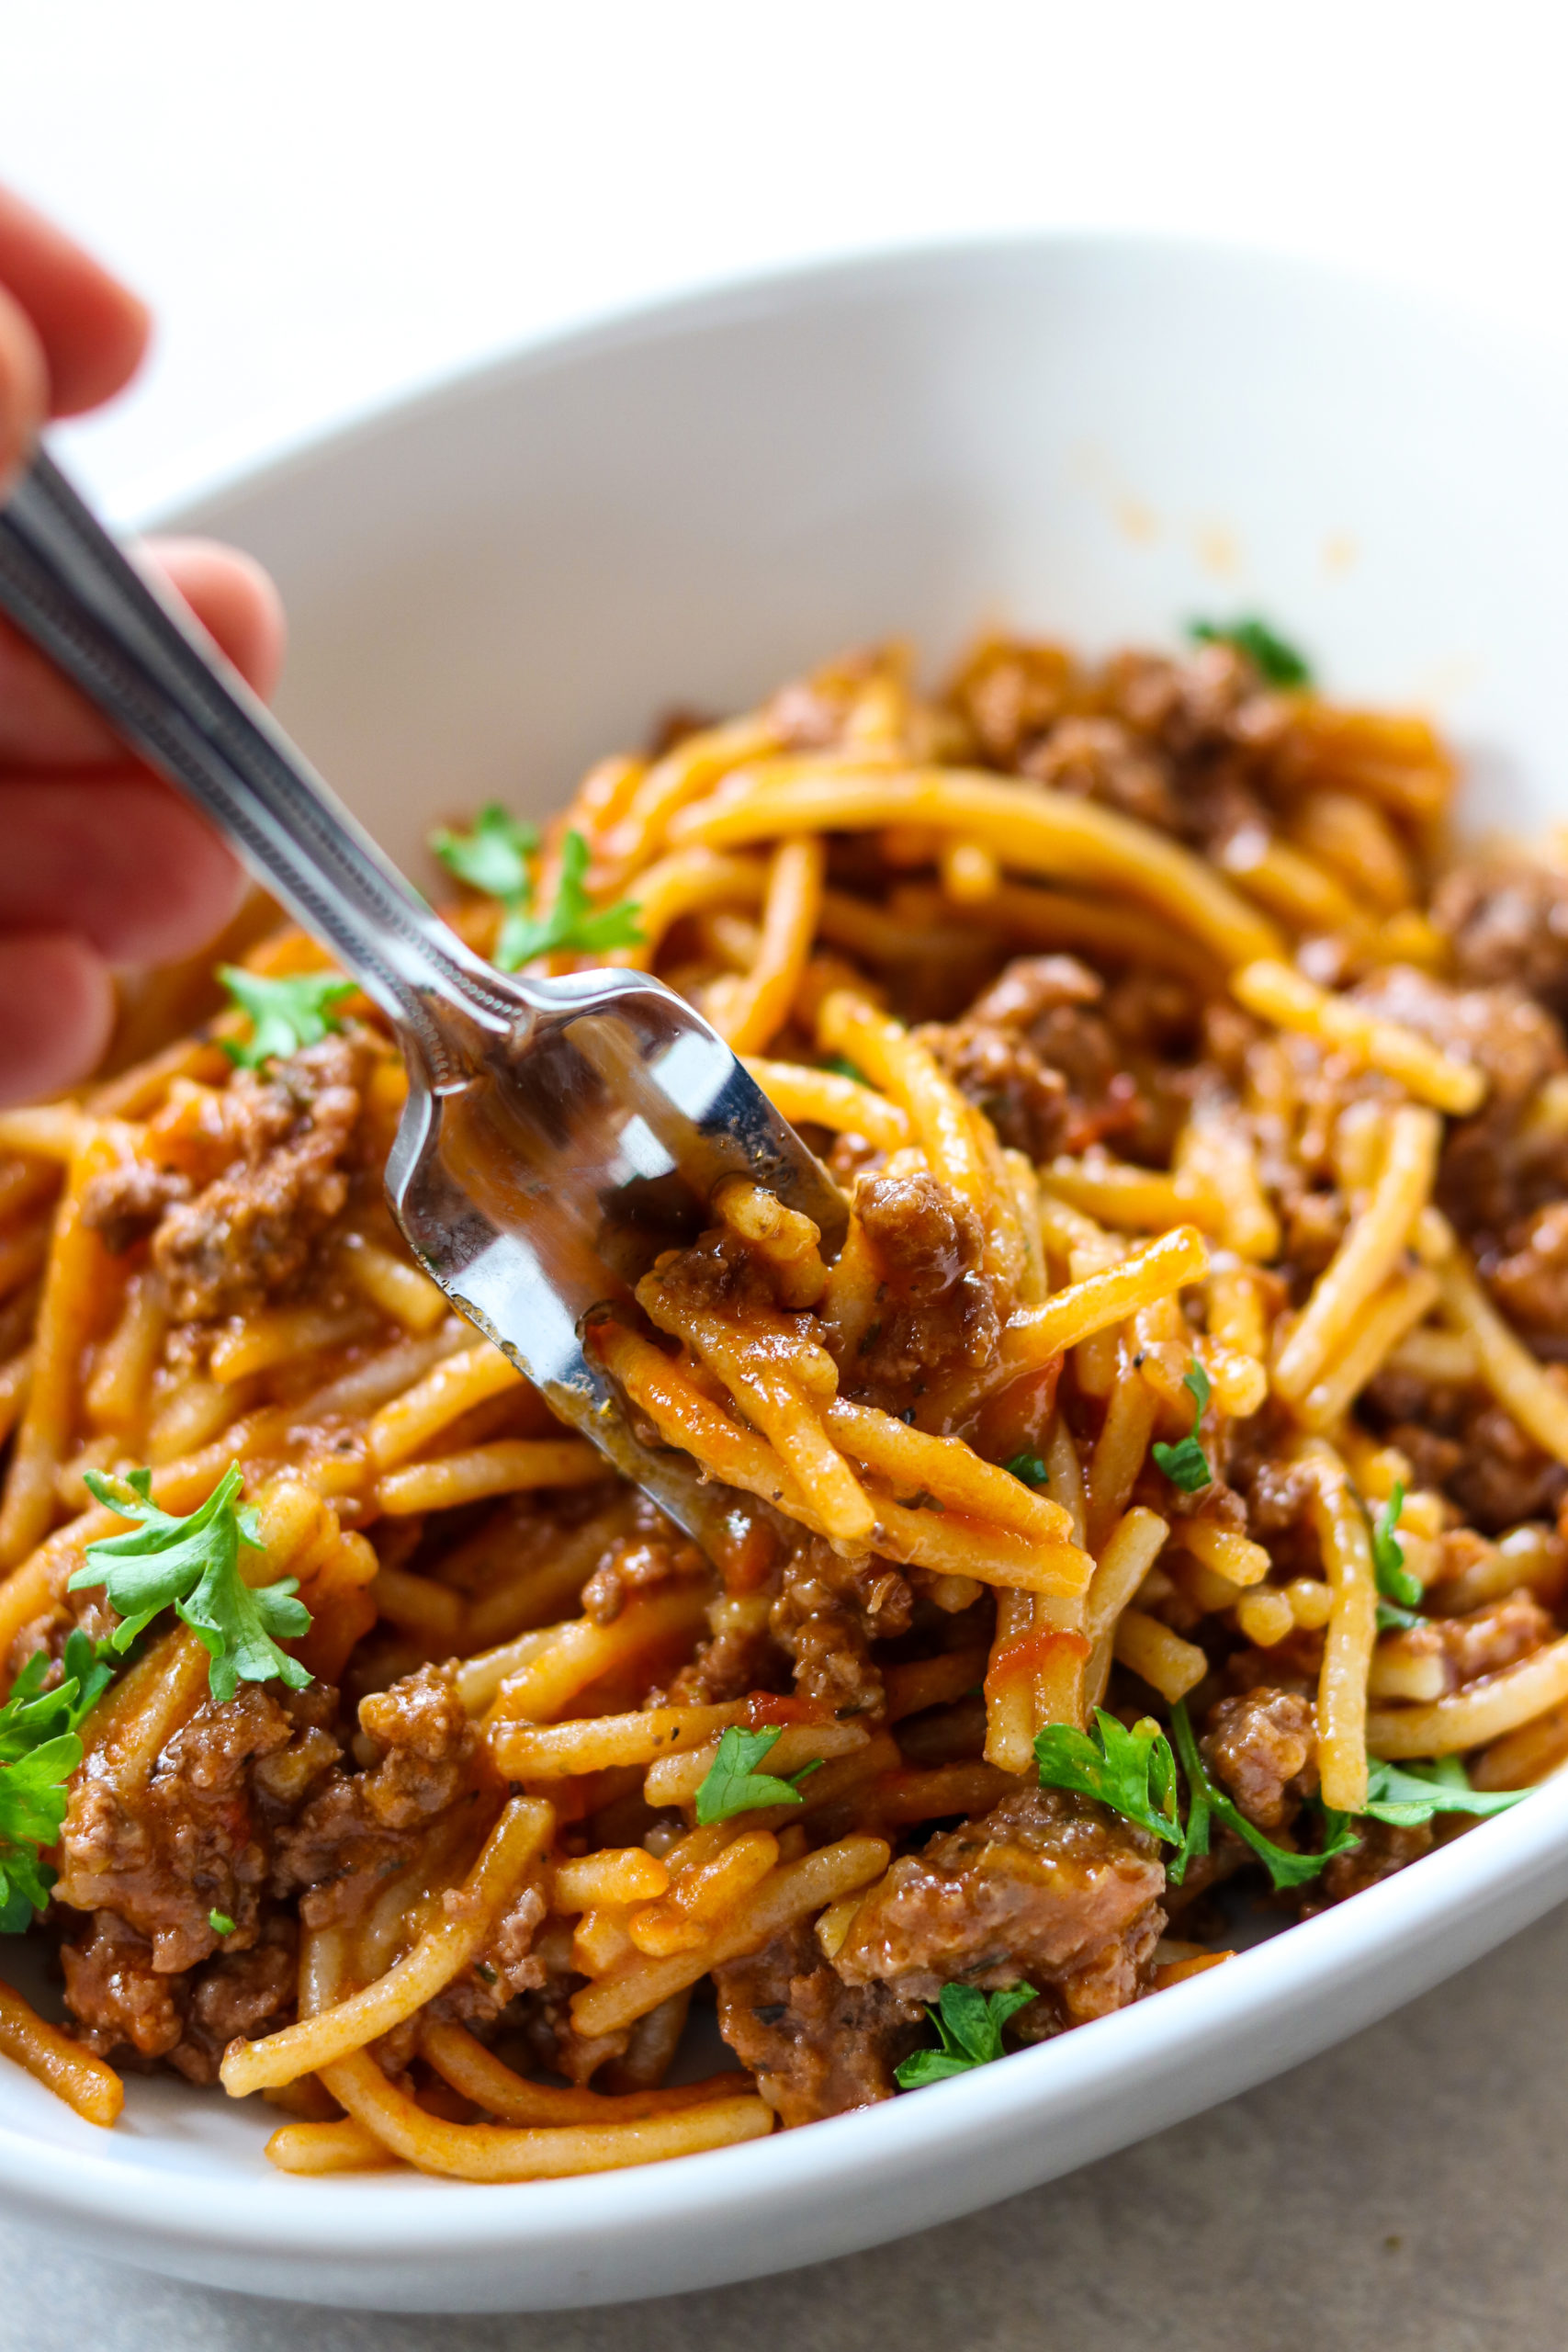 Instant Pot Spaghetti and Meat Sauce